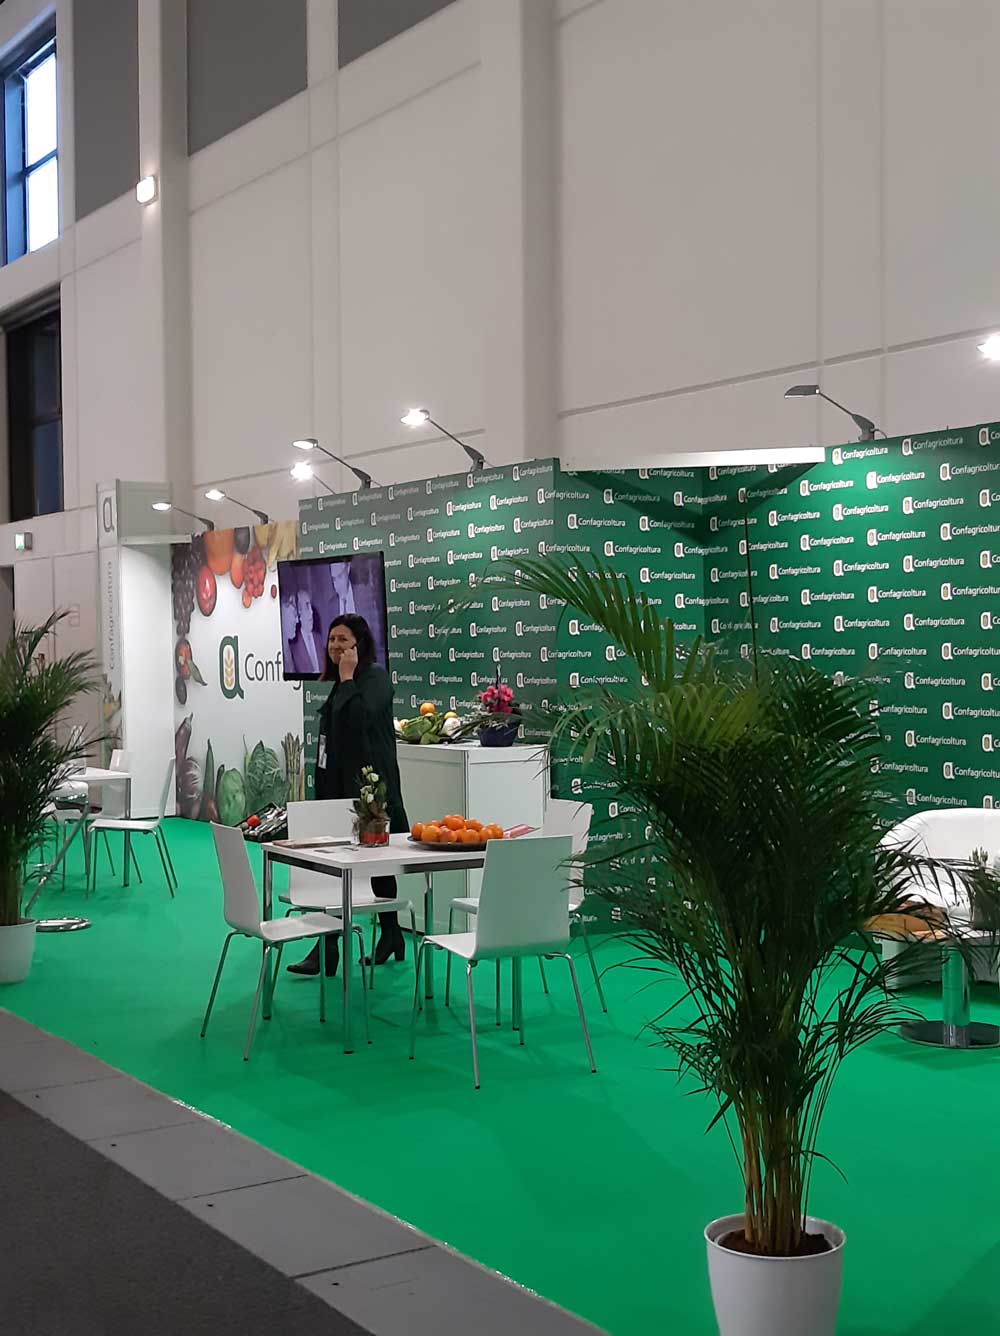 Confagricoltura-participated-in-Fruit-Logistica-with-a-stand-in-the-Italian-Pavilion-where-it-carried-out-promotional-activities-for-the-h-Alo-project